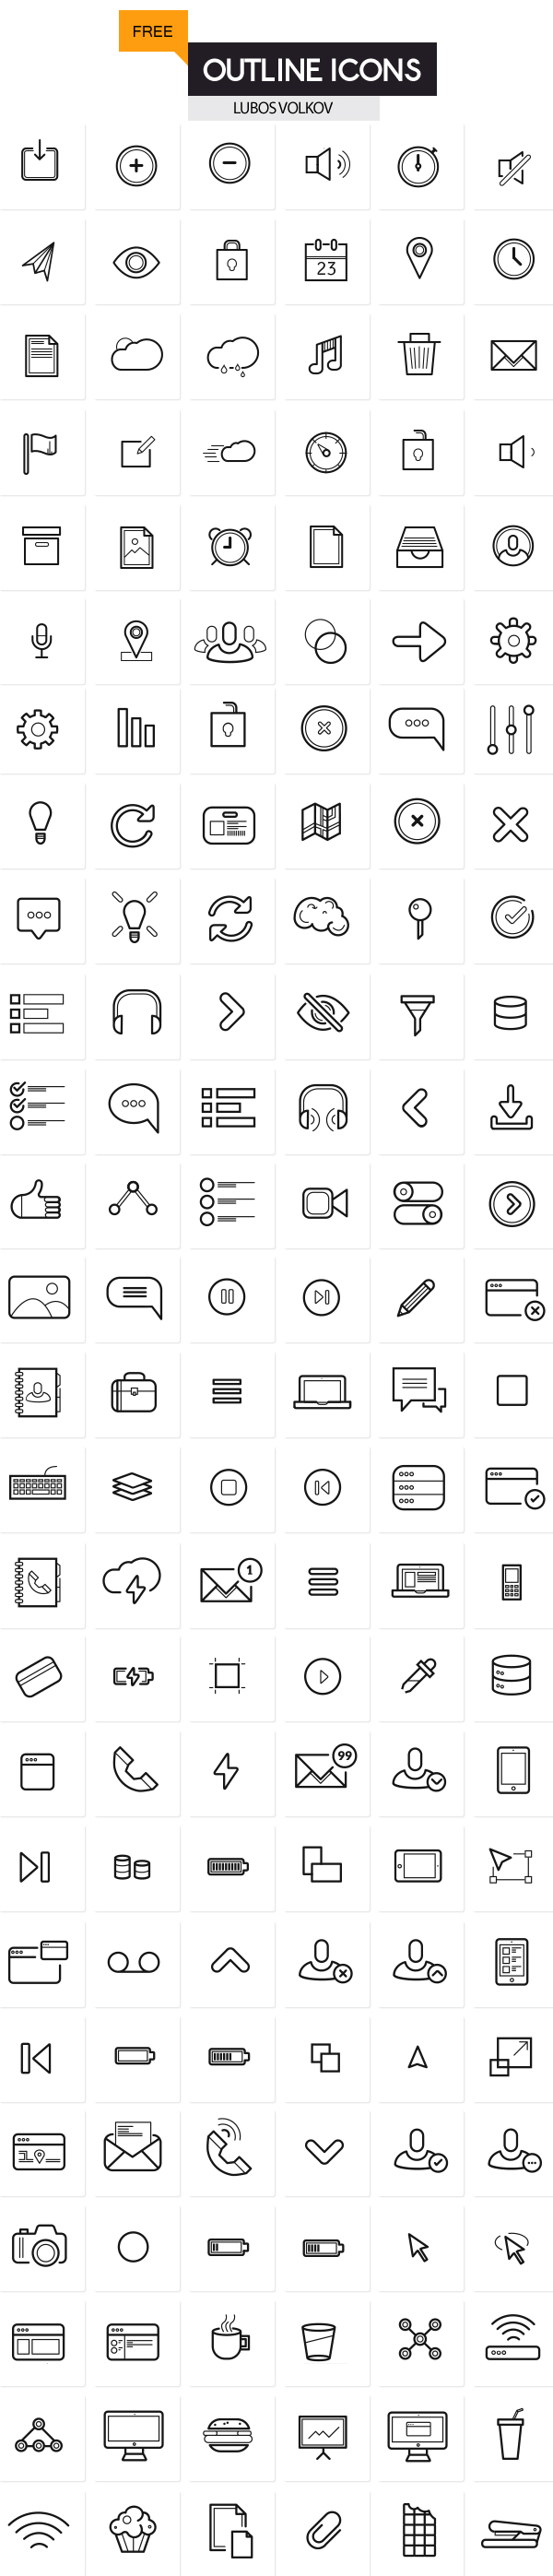 Outline Icons Set (200 free icons)